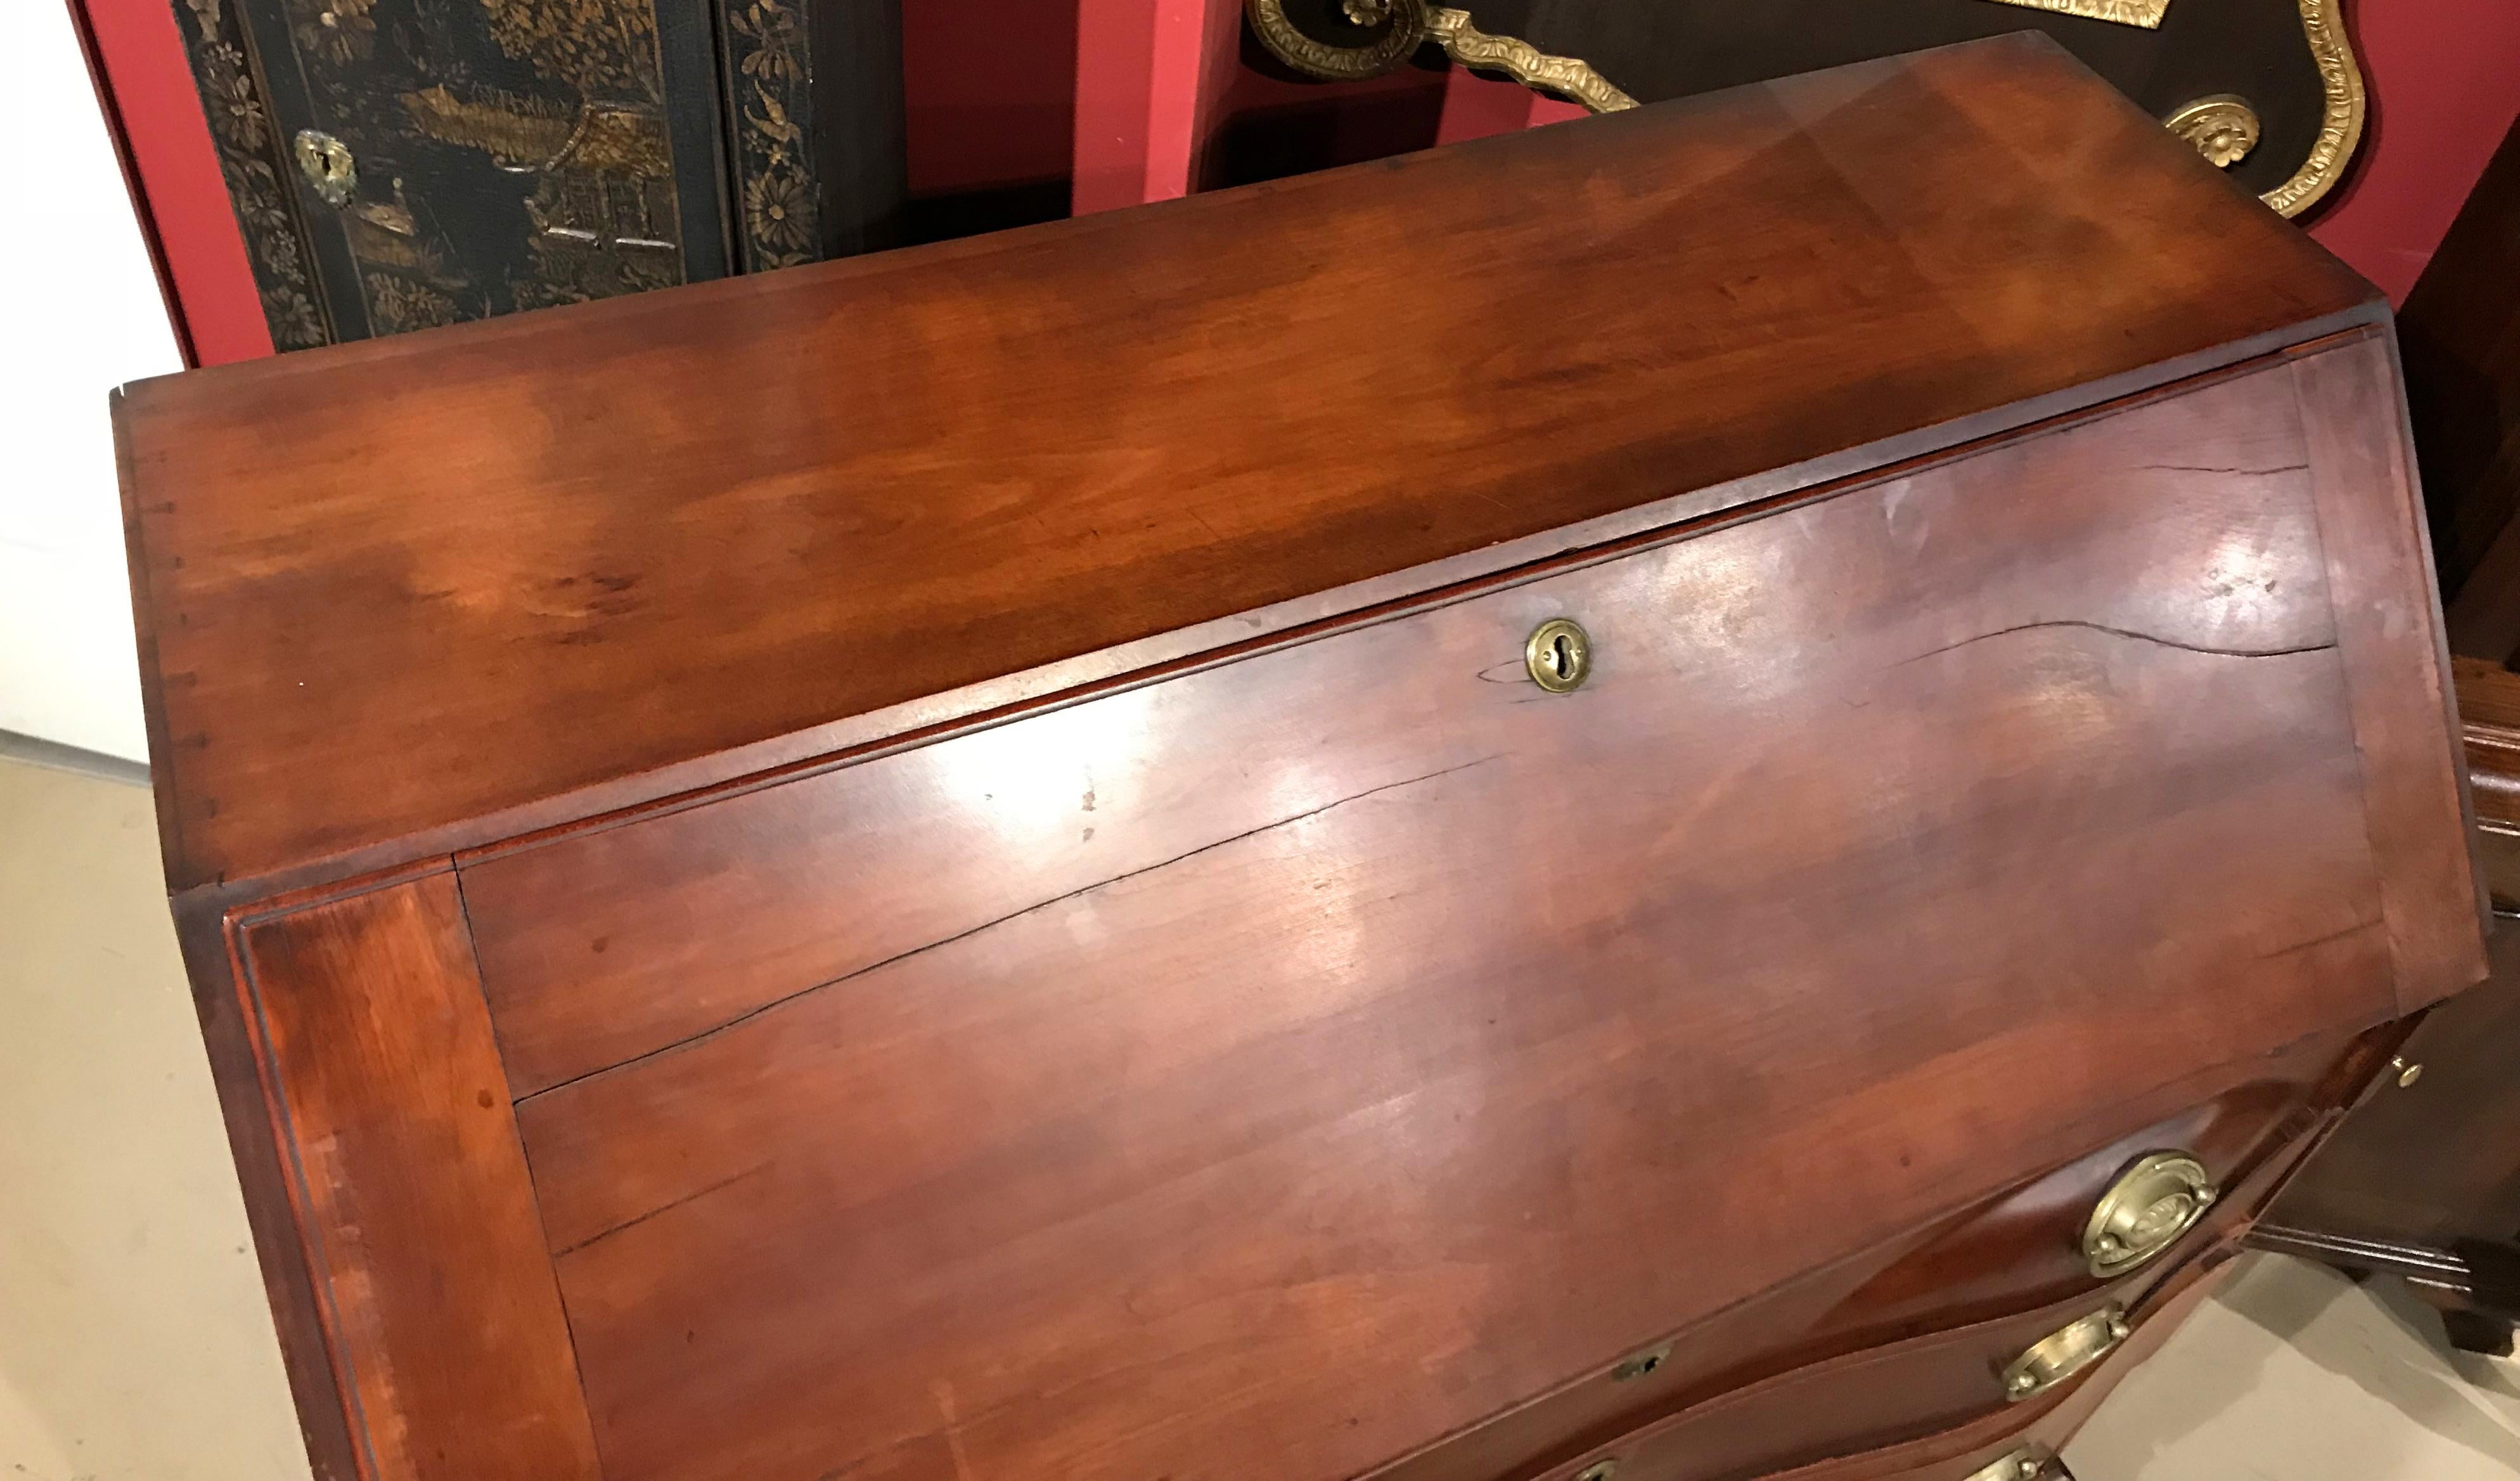 Hand-Carved New England Chippendale Cherry Oxbow Slant Front Desk, circa 1780-1800